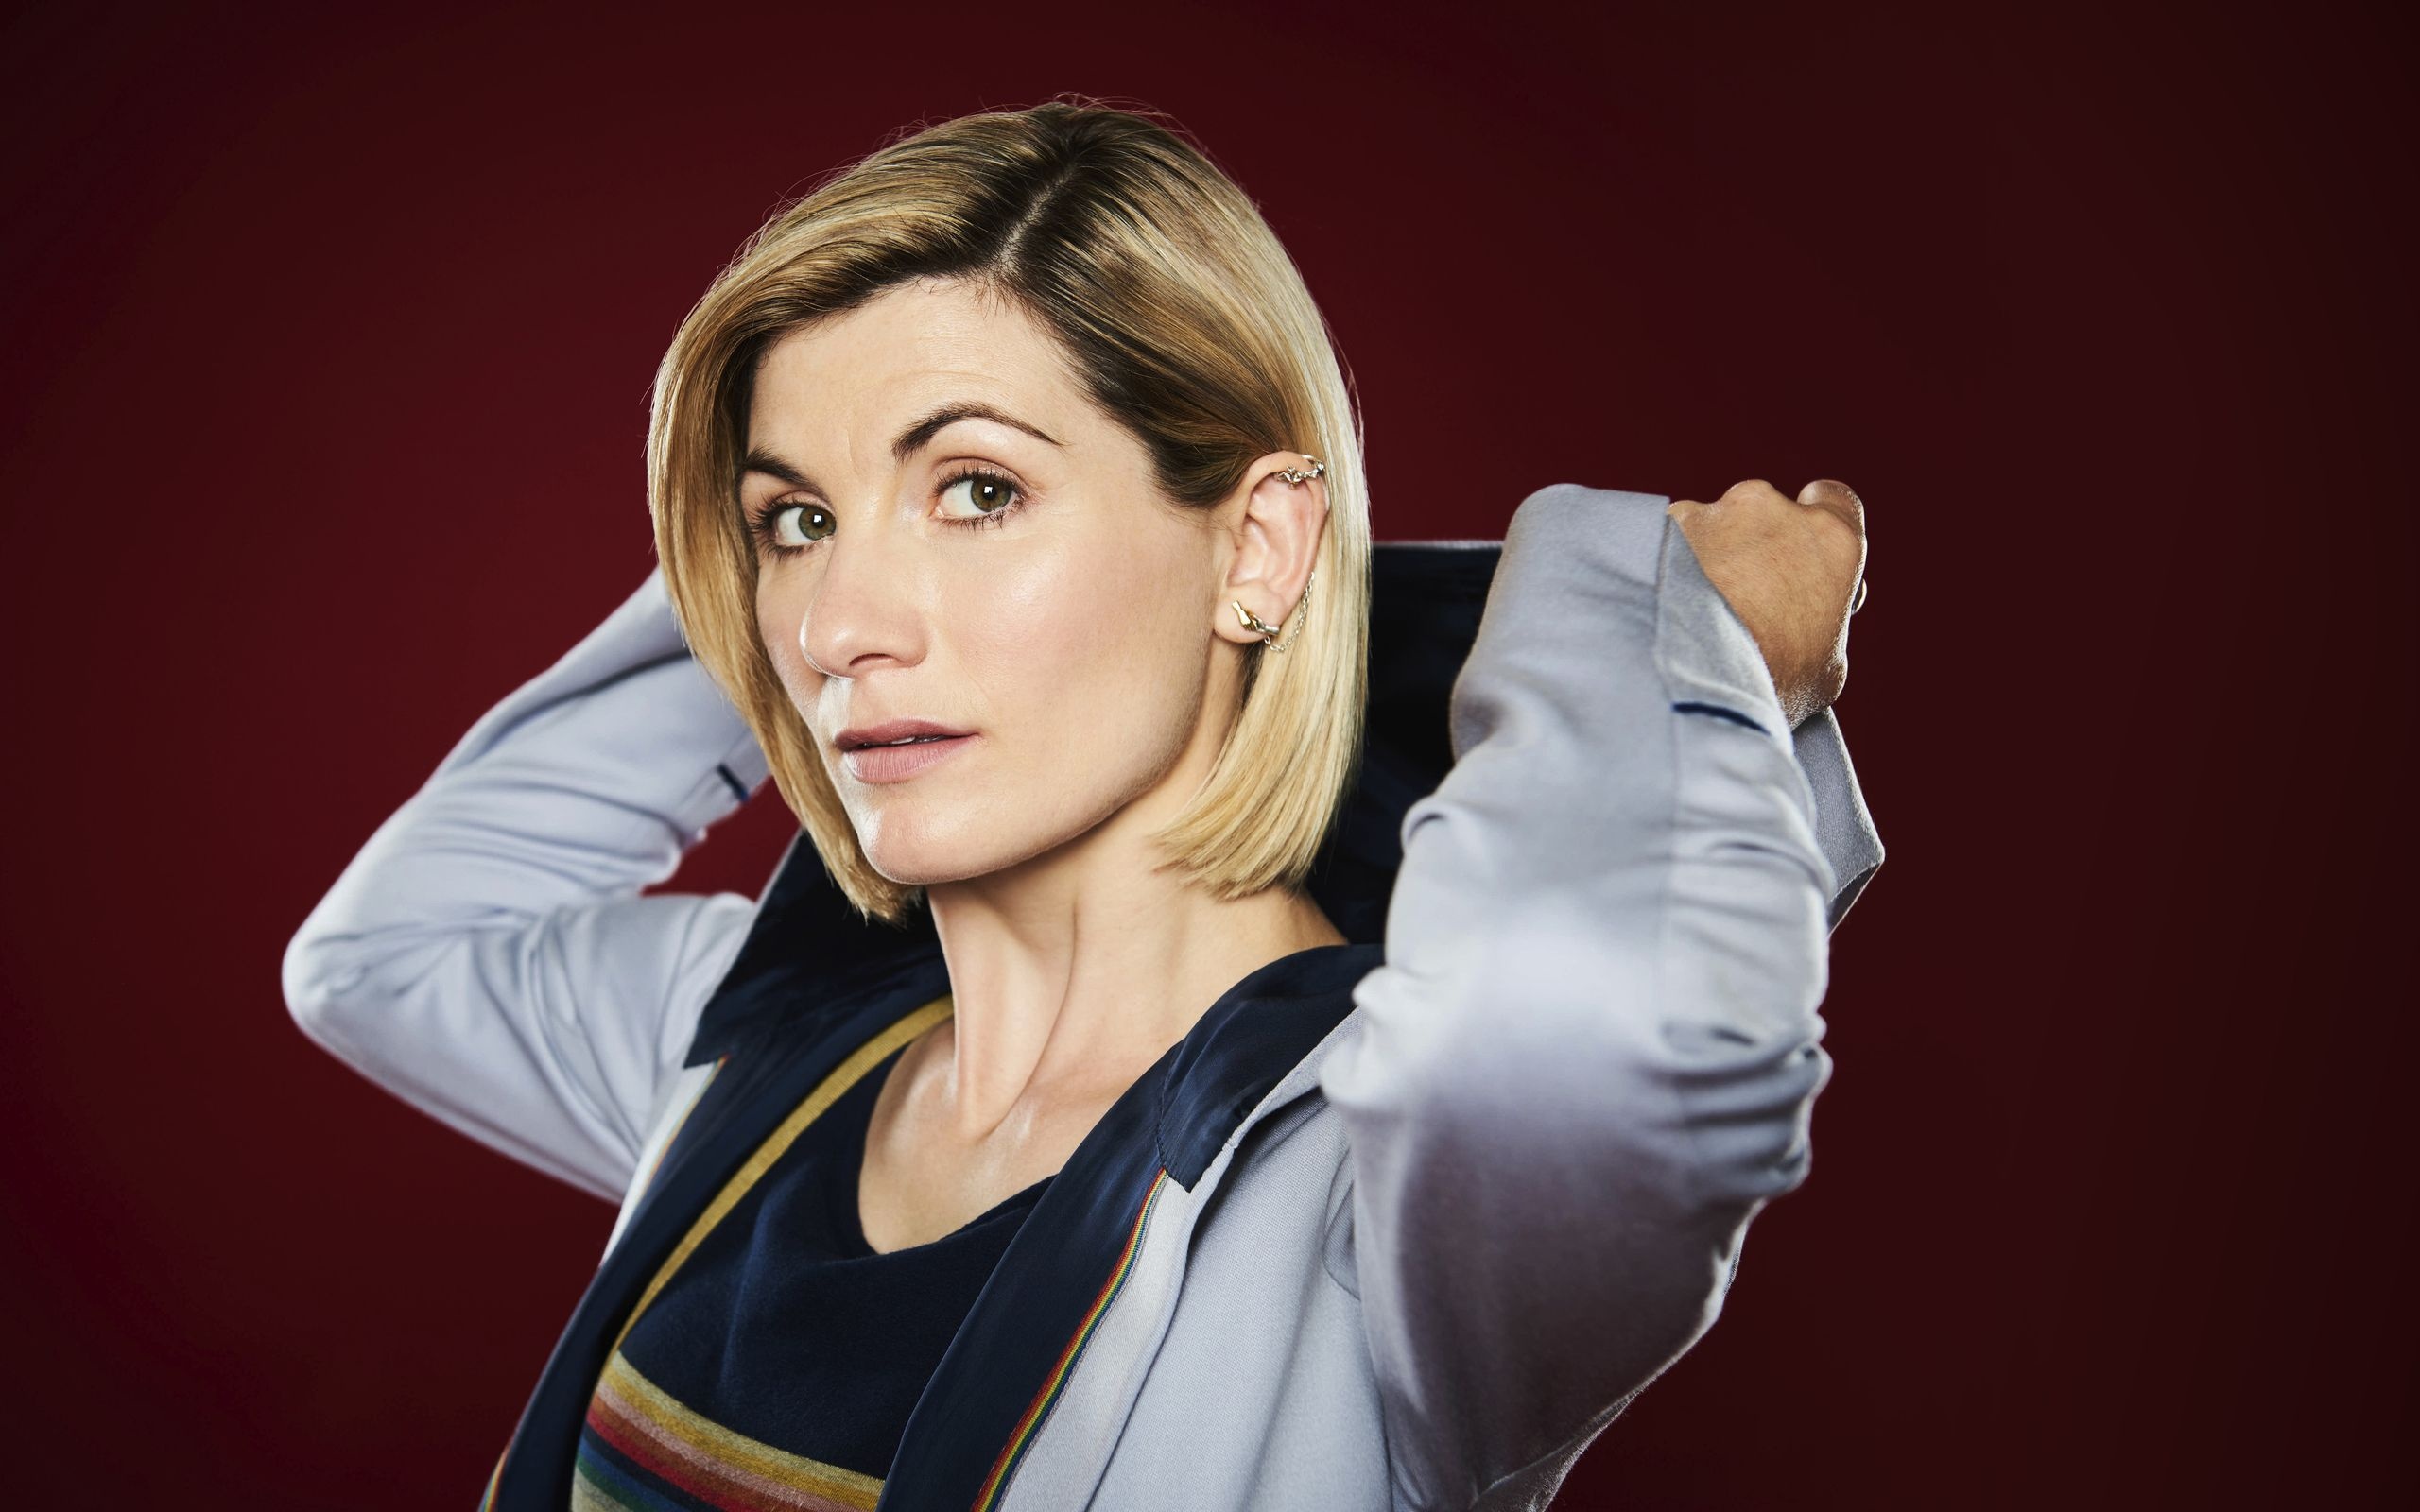 Jodie Whittaker Wallpapers, Whittaker's Backgrounds, Movies, Doctor Who, 2560x1600 HD Desktop